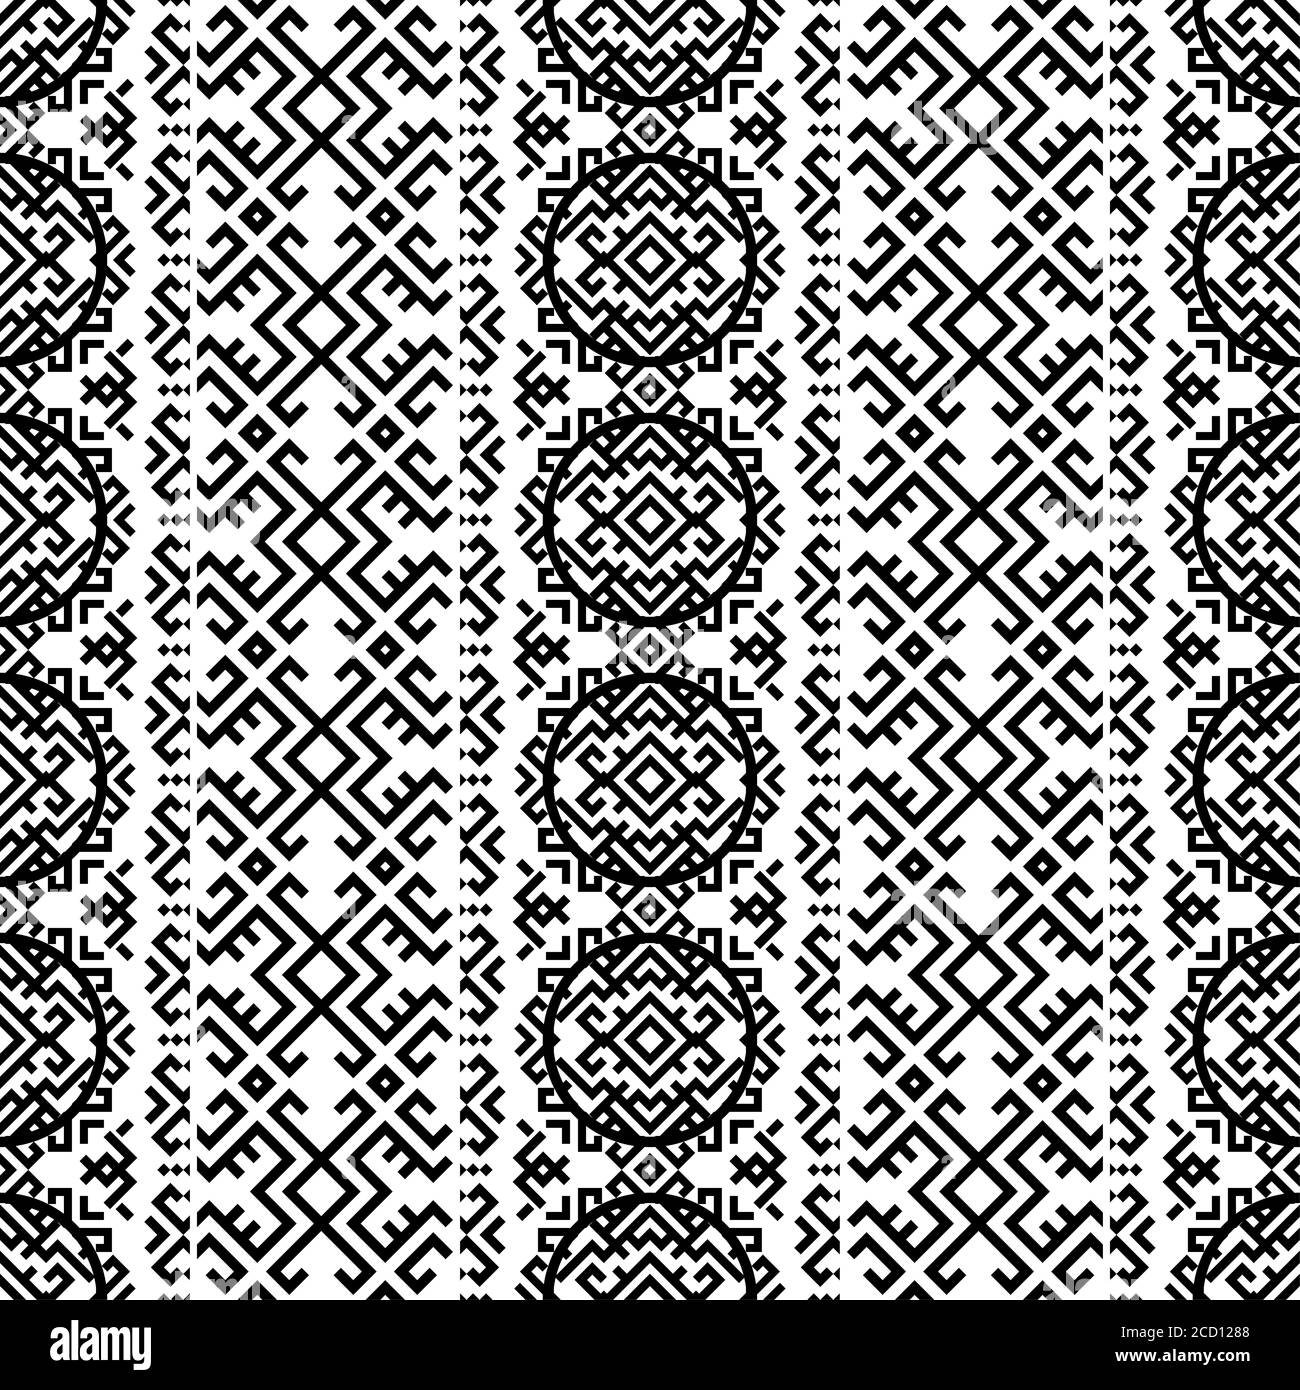 Persian ethnic motif pattern texture design background in monochrome color Stock Photo